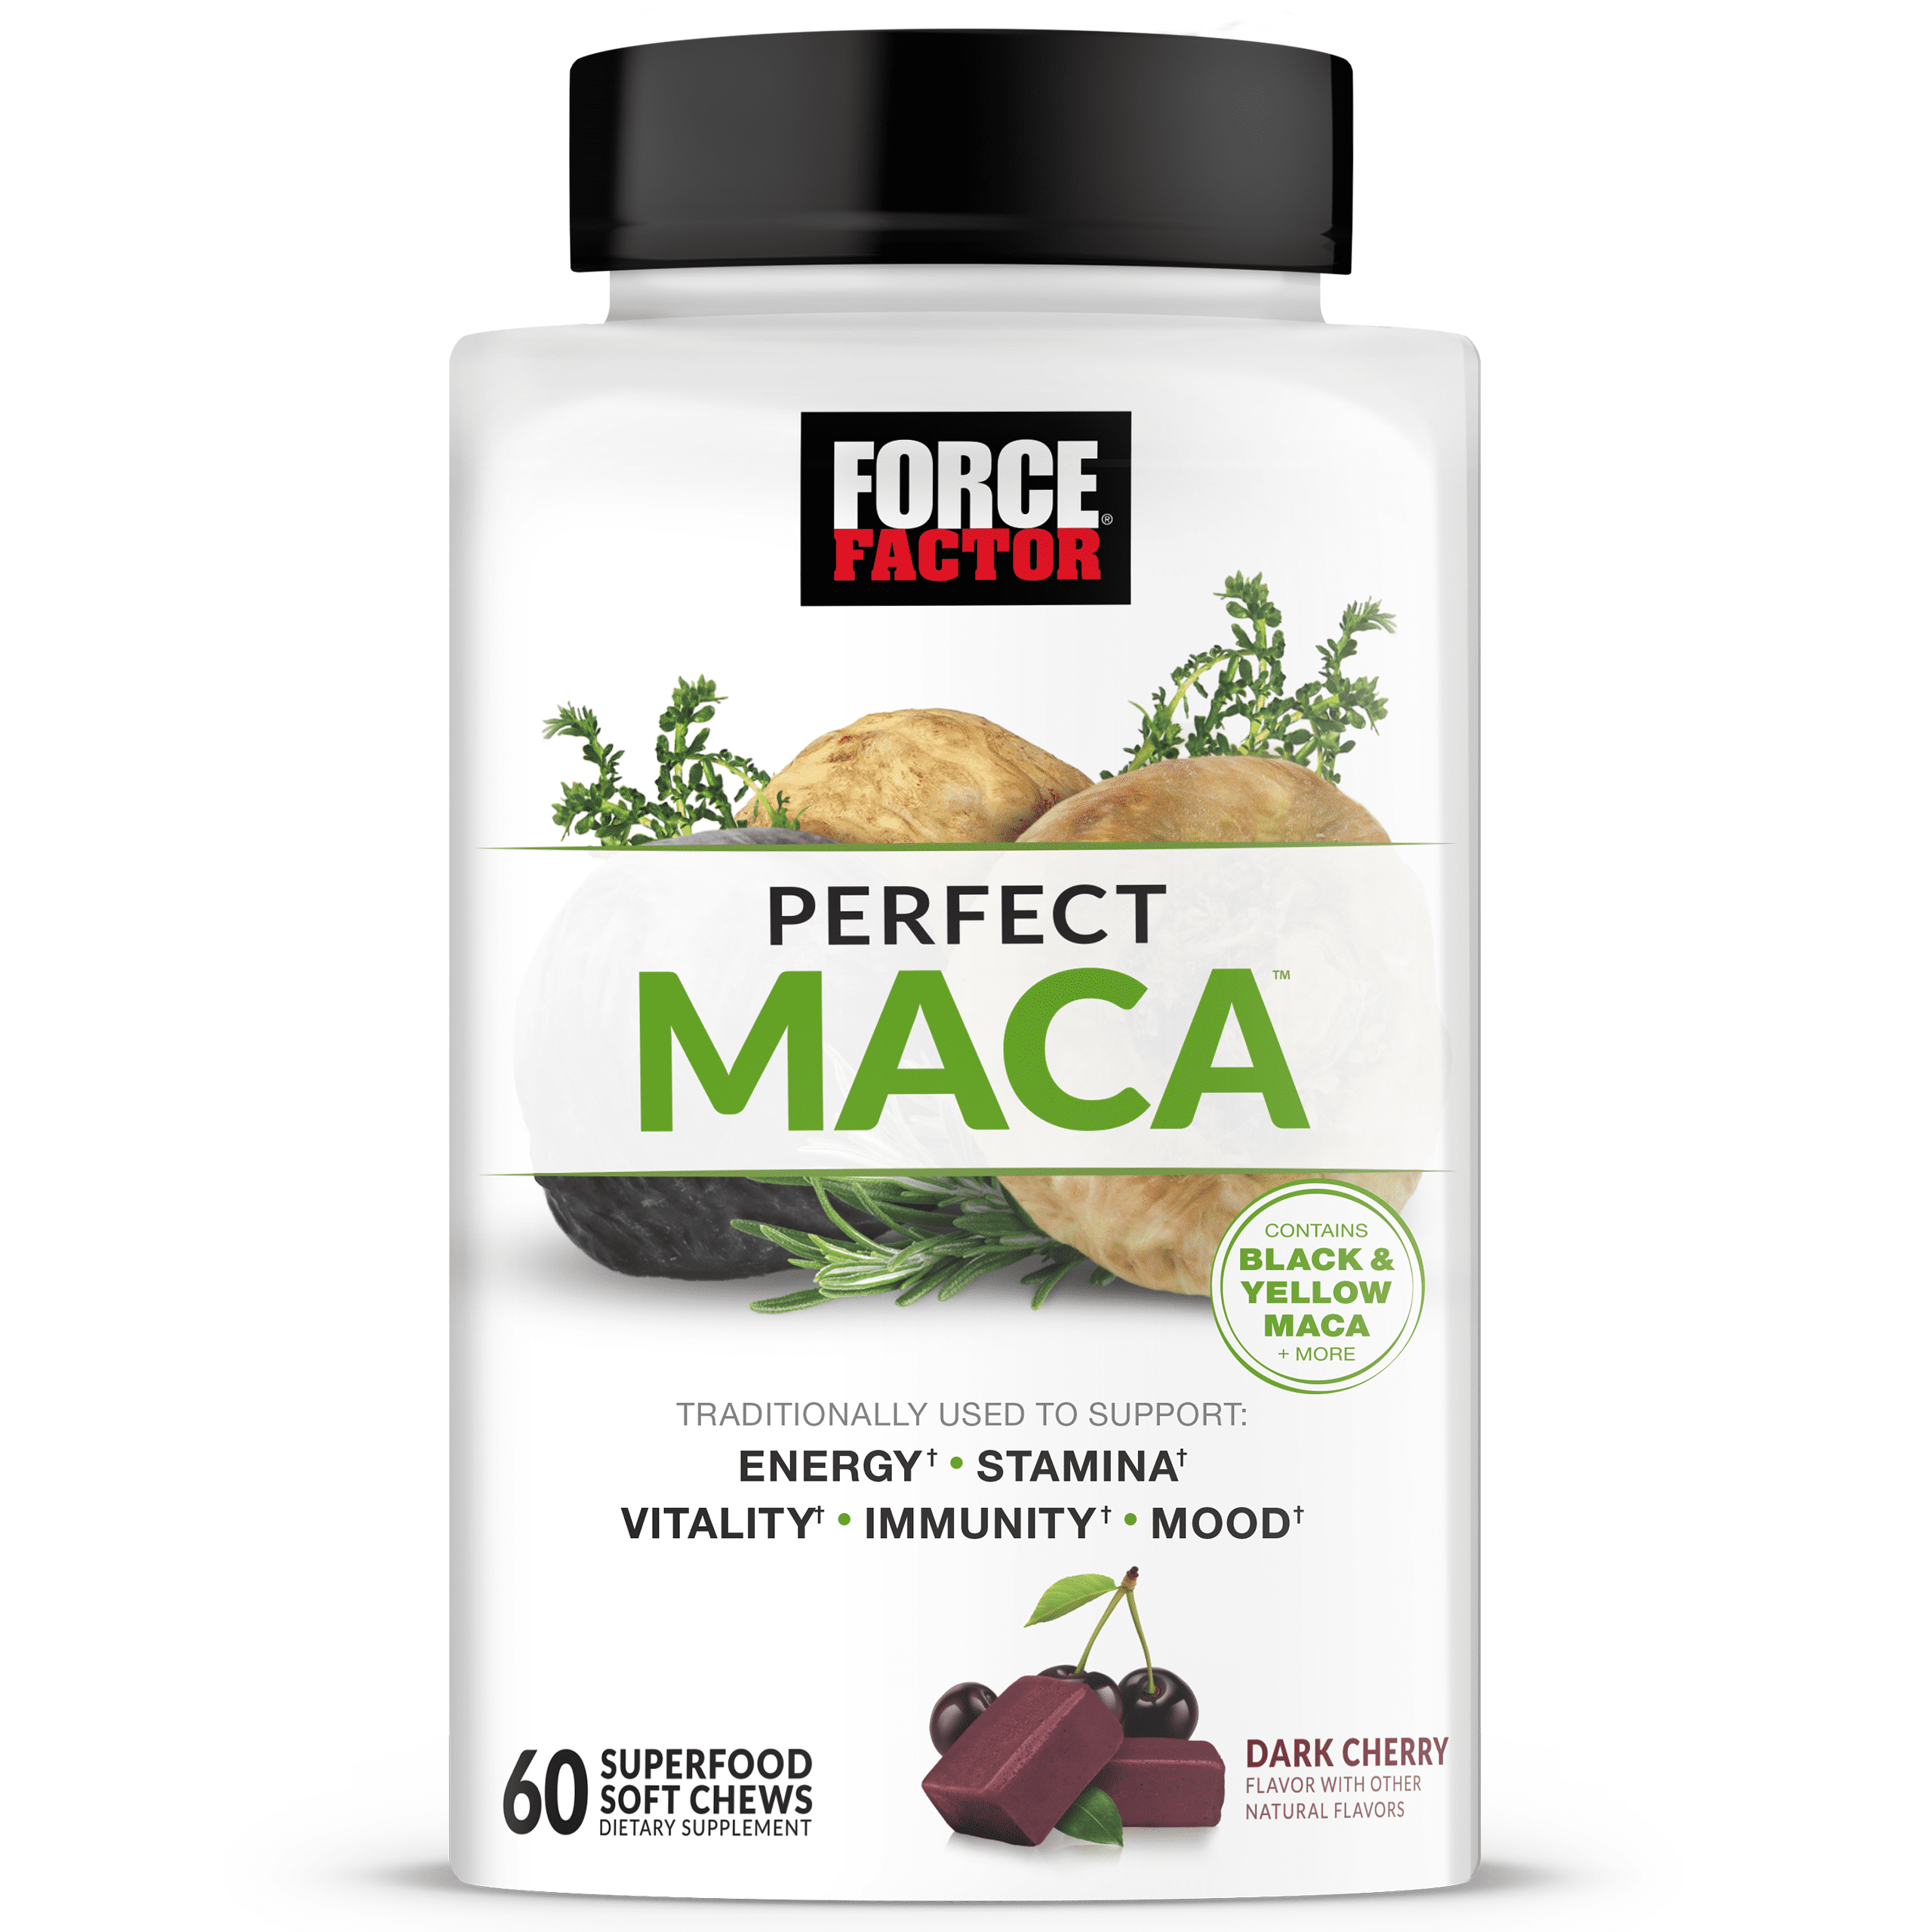 Force Factor Perfect Maca, Maca Root and DIM Supplement with Saffron to  Boost Energy and Mood, with Yellow and Black Maca, Vitamins, Minerals, and